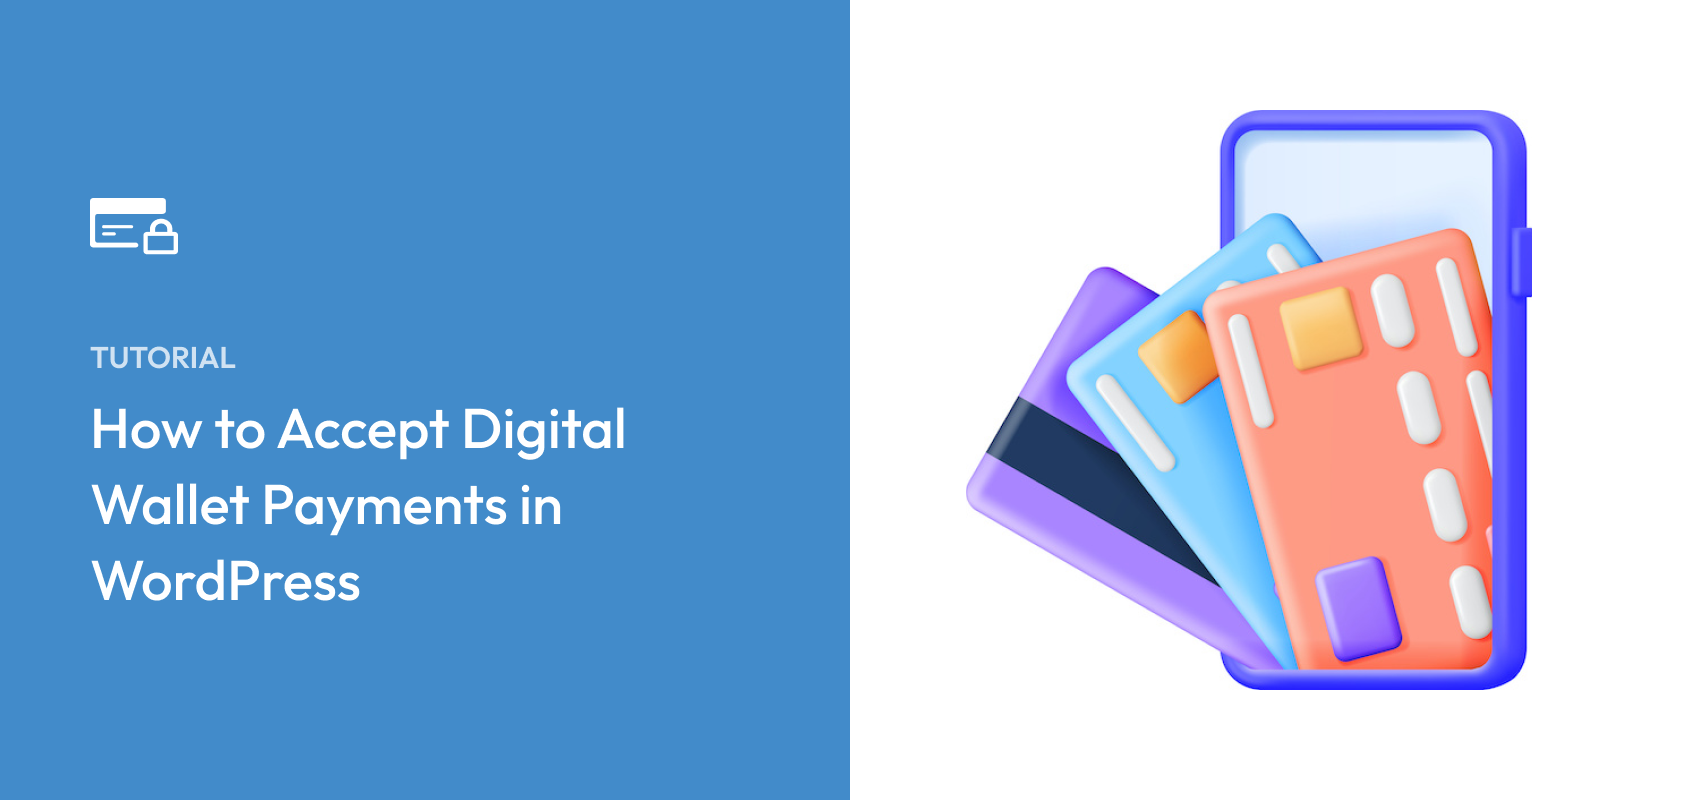 How to Accept Digital Wallet Payments in WordPress